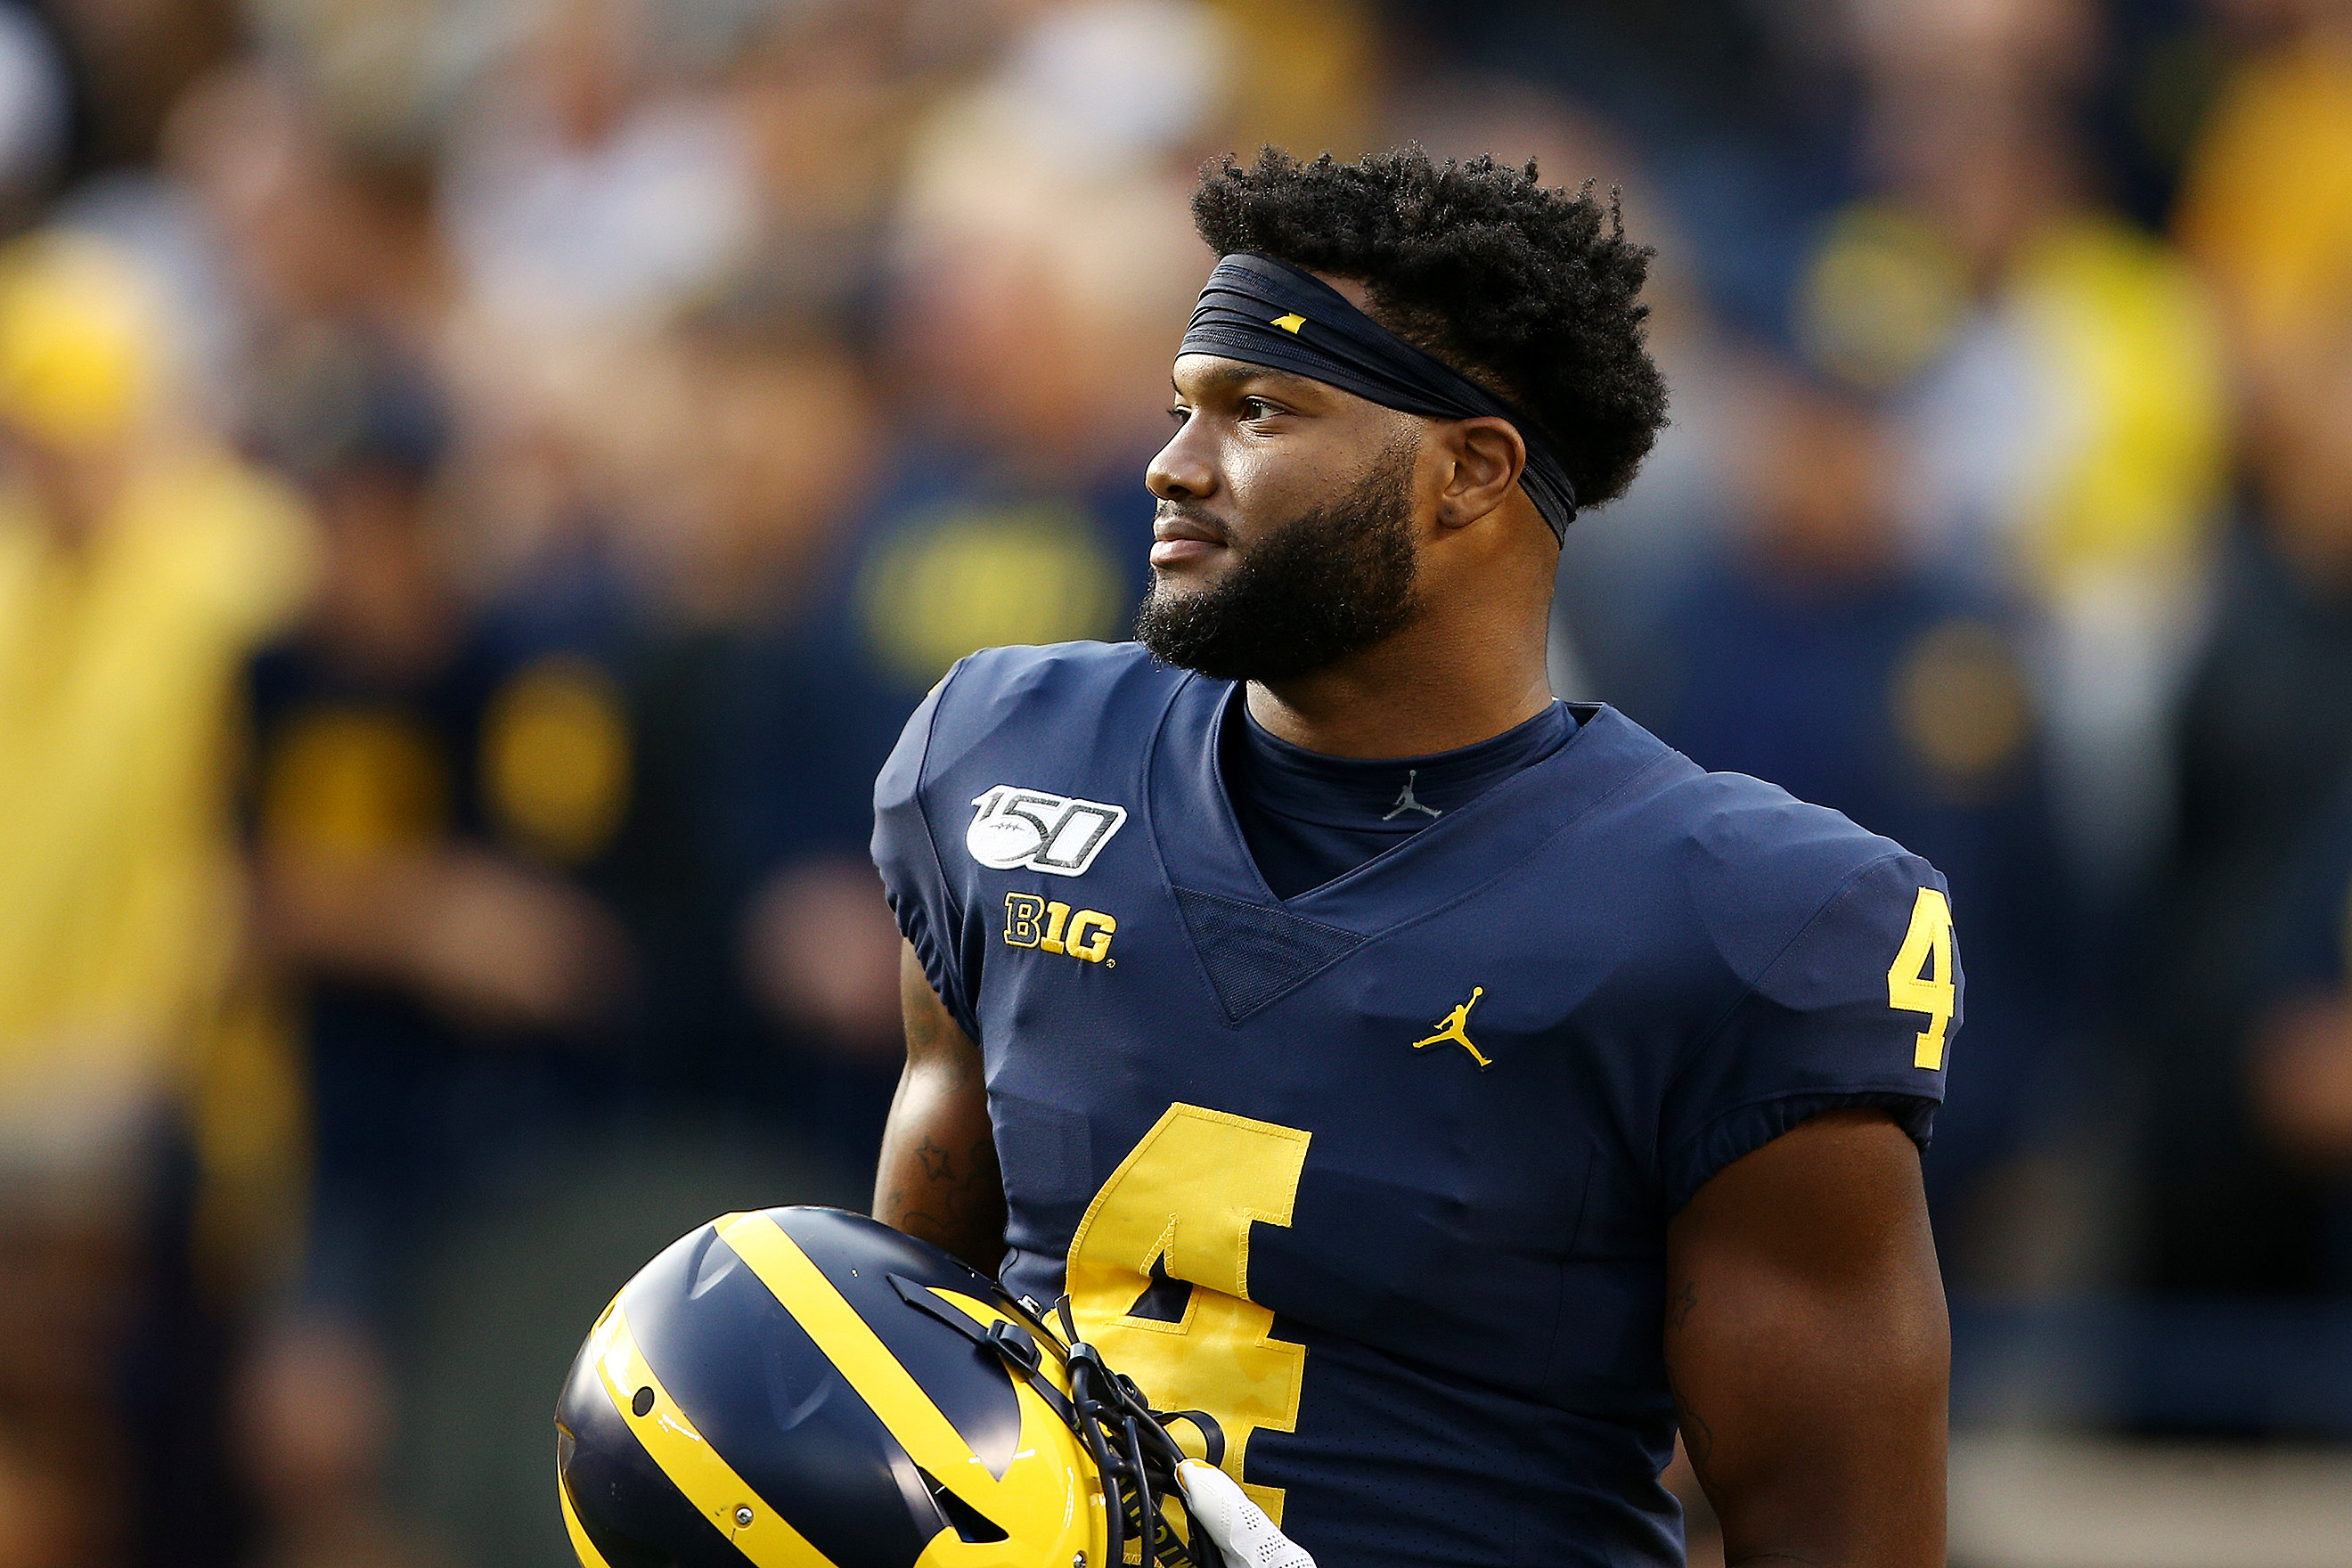 Giles Jackson, Andre Seldon To Wear No. 0 At Michigan - Sports Illustrated  Michigan Wolverines News, Analysis and More